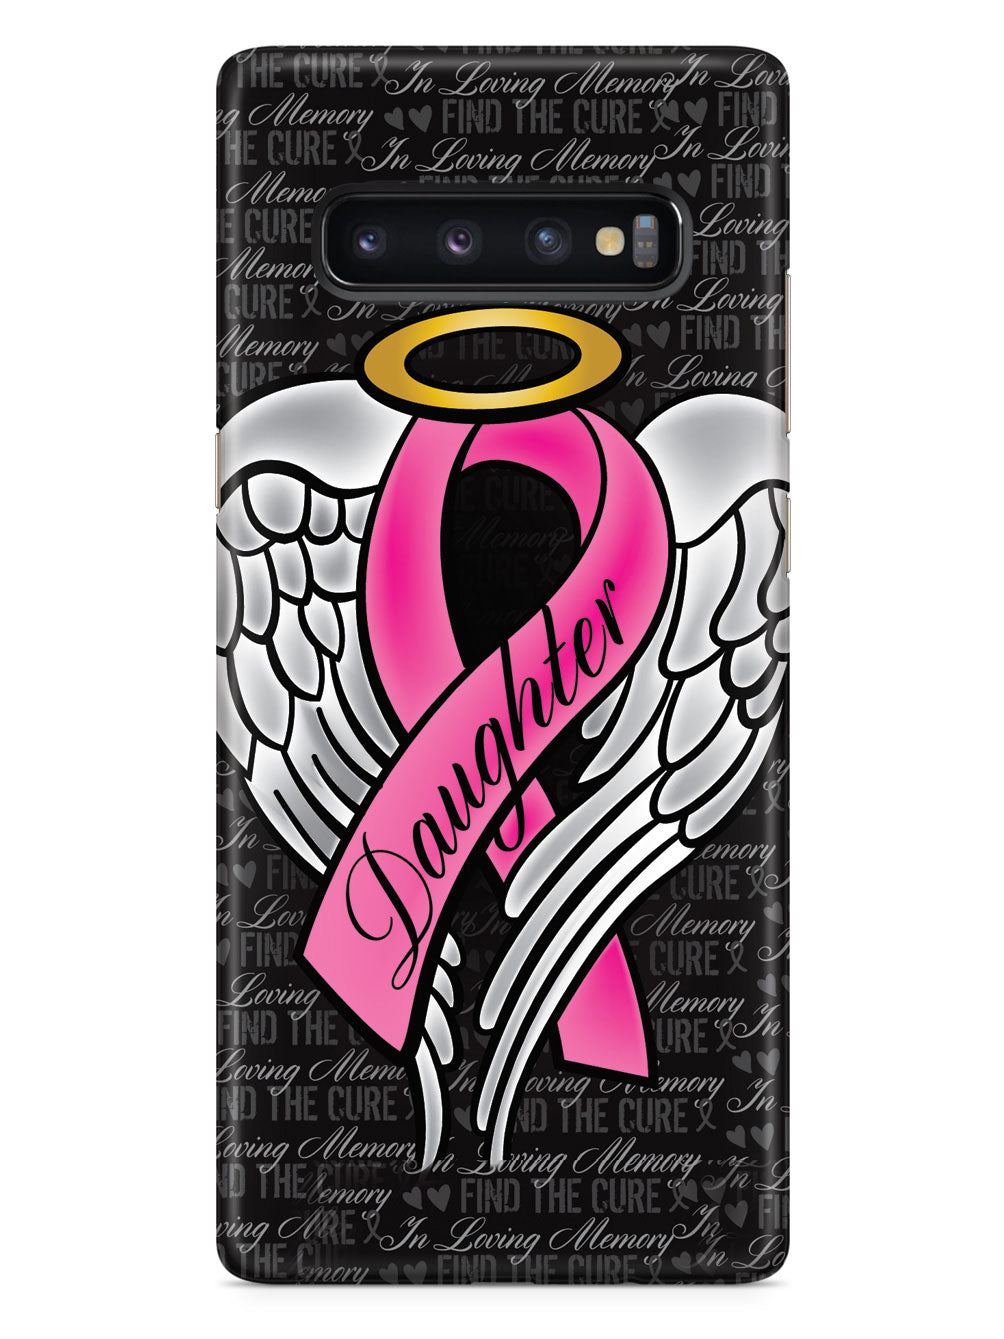 In Loving Memory of My Daughter - Pink Ribbon Case